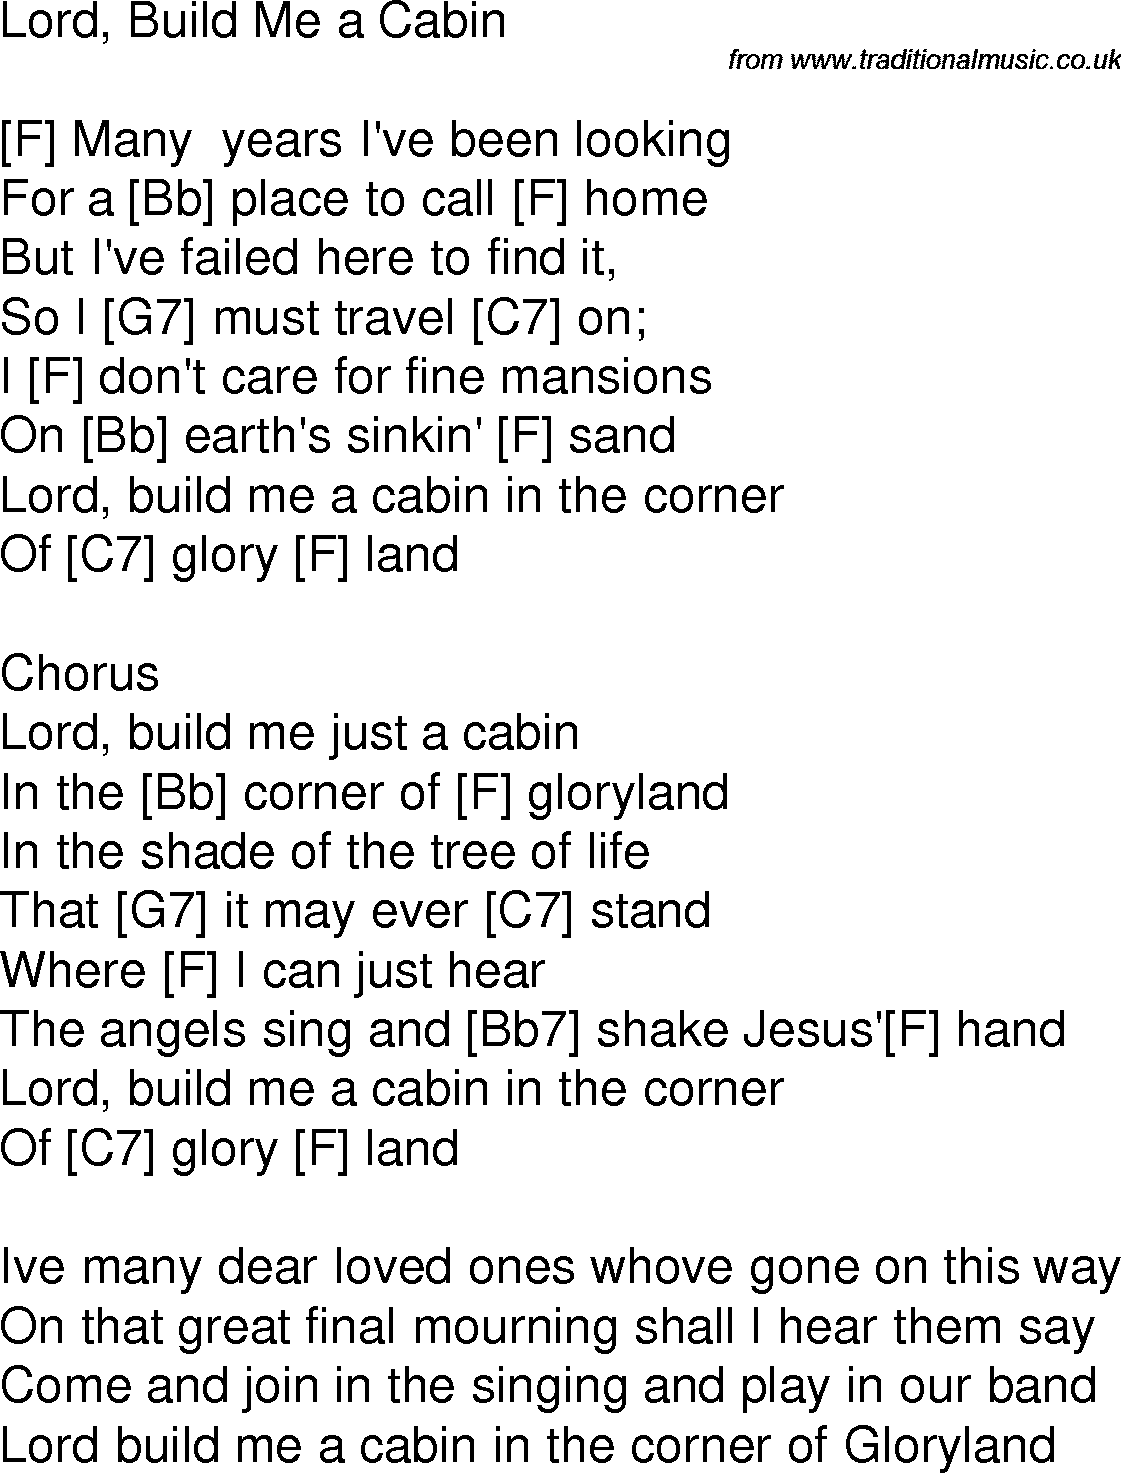 Old time song lyrics with chords for Lord, Build Me A Cabin F